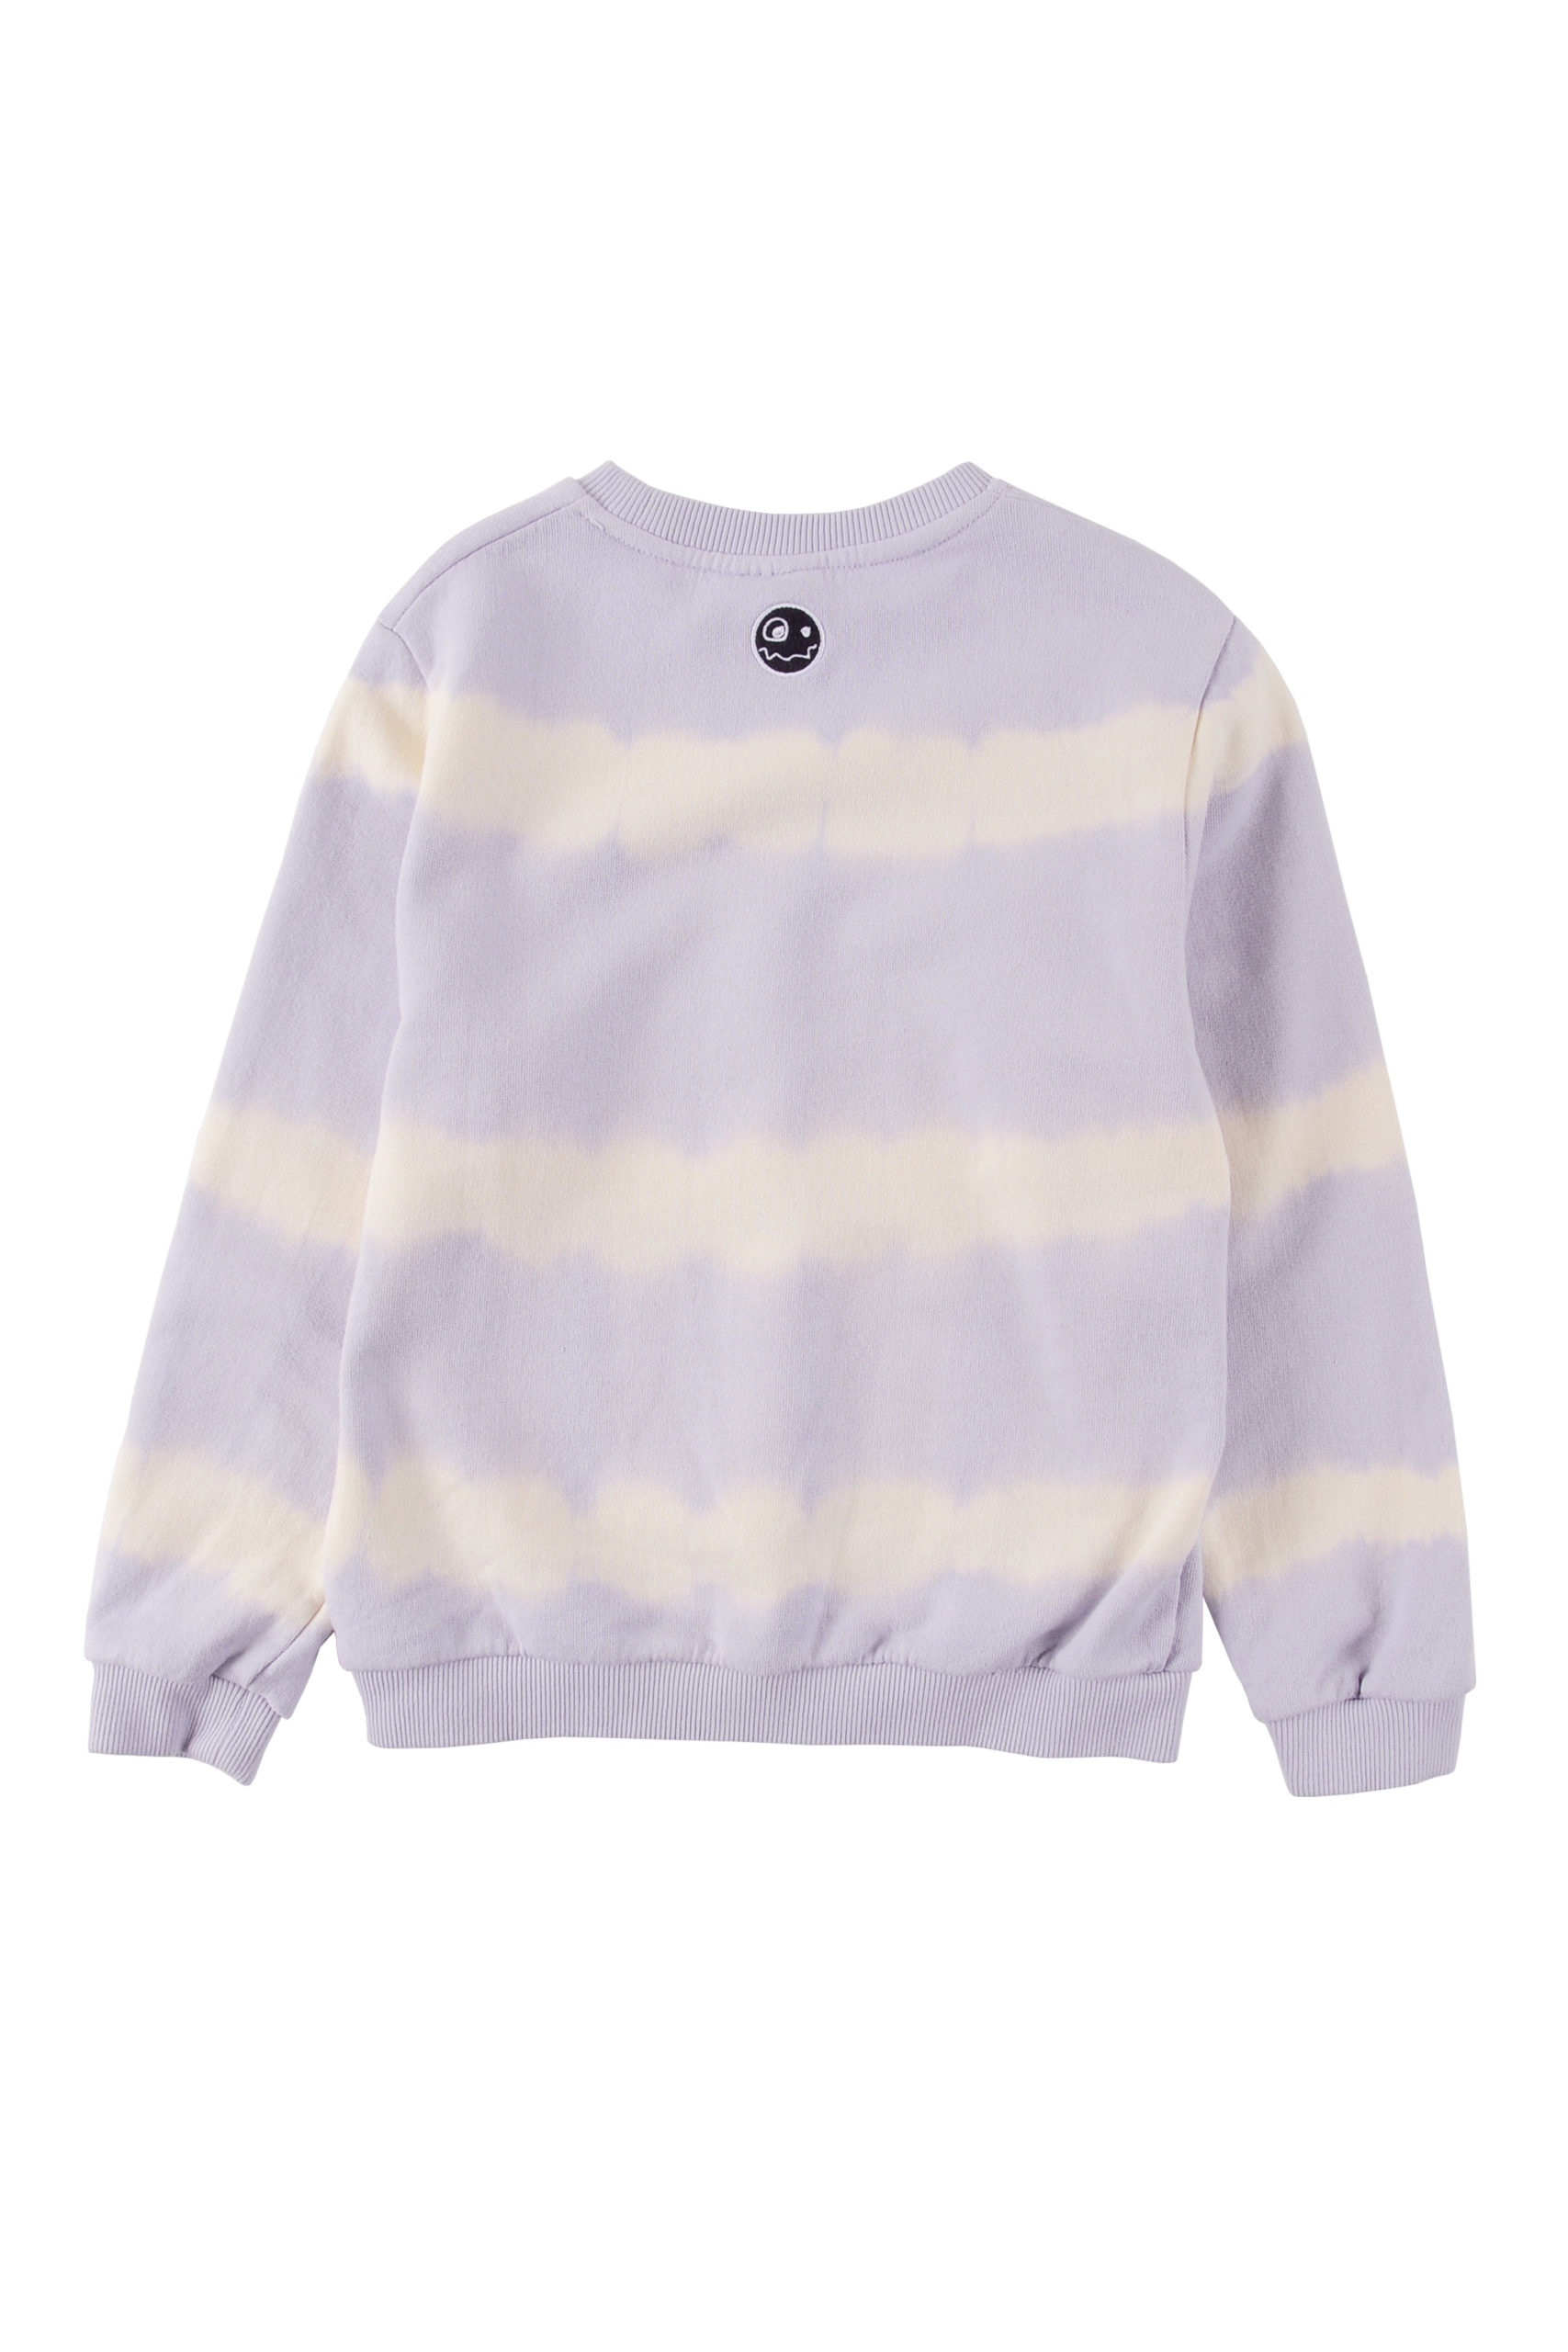 Blue, Lavender, and White Tie-Dye Jersey Knit - Soft and Fun! LAST